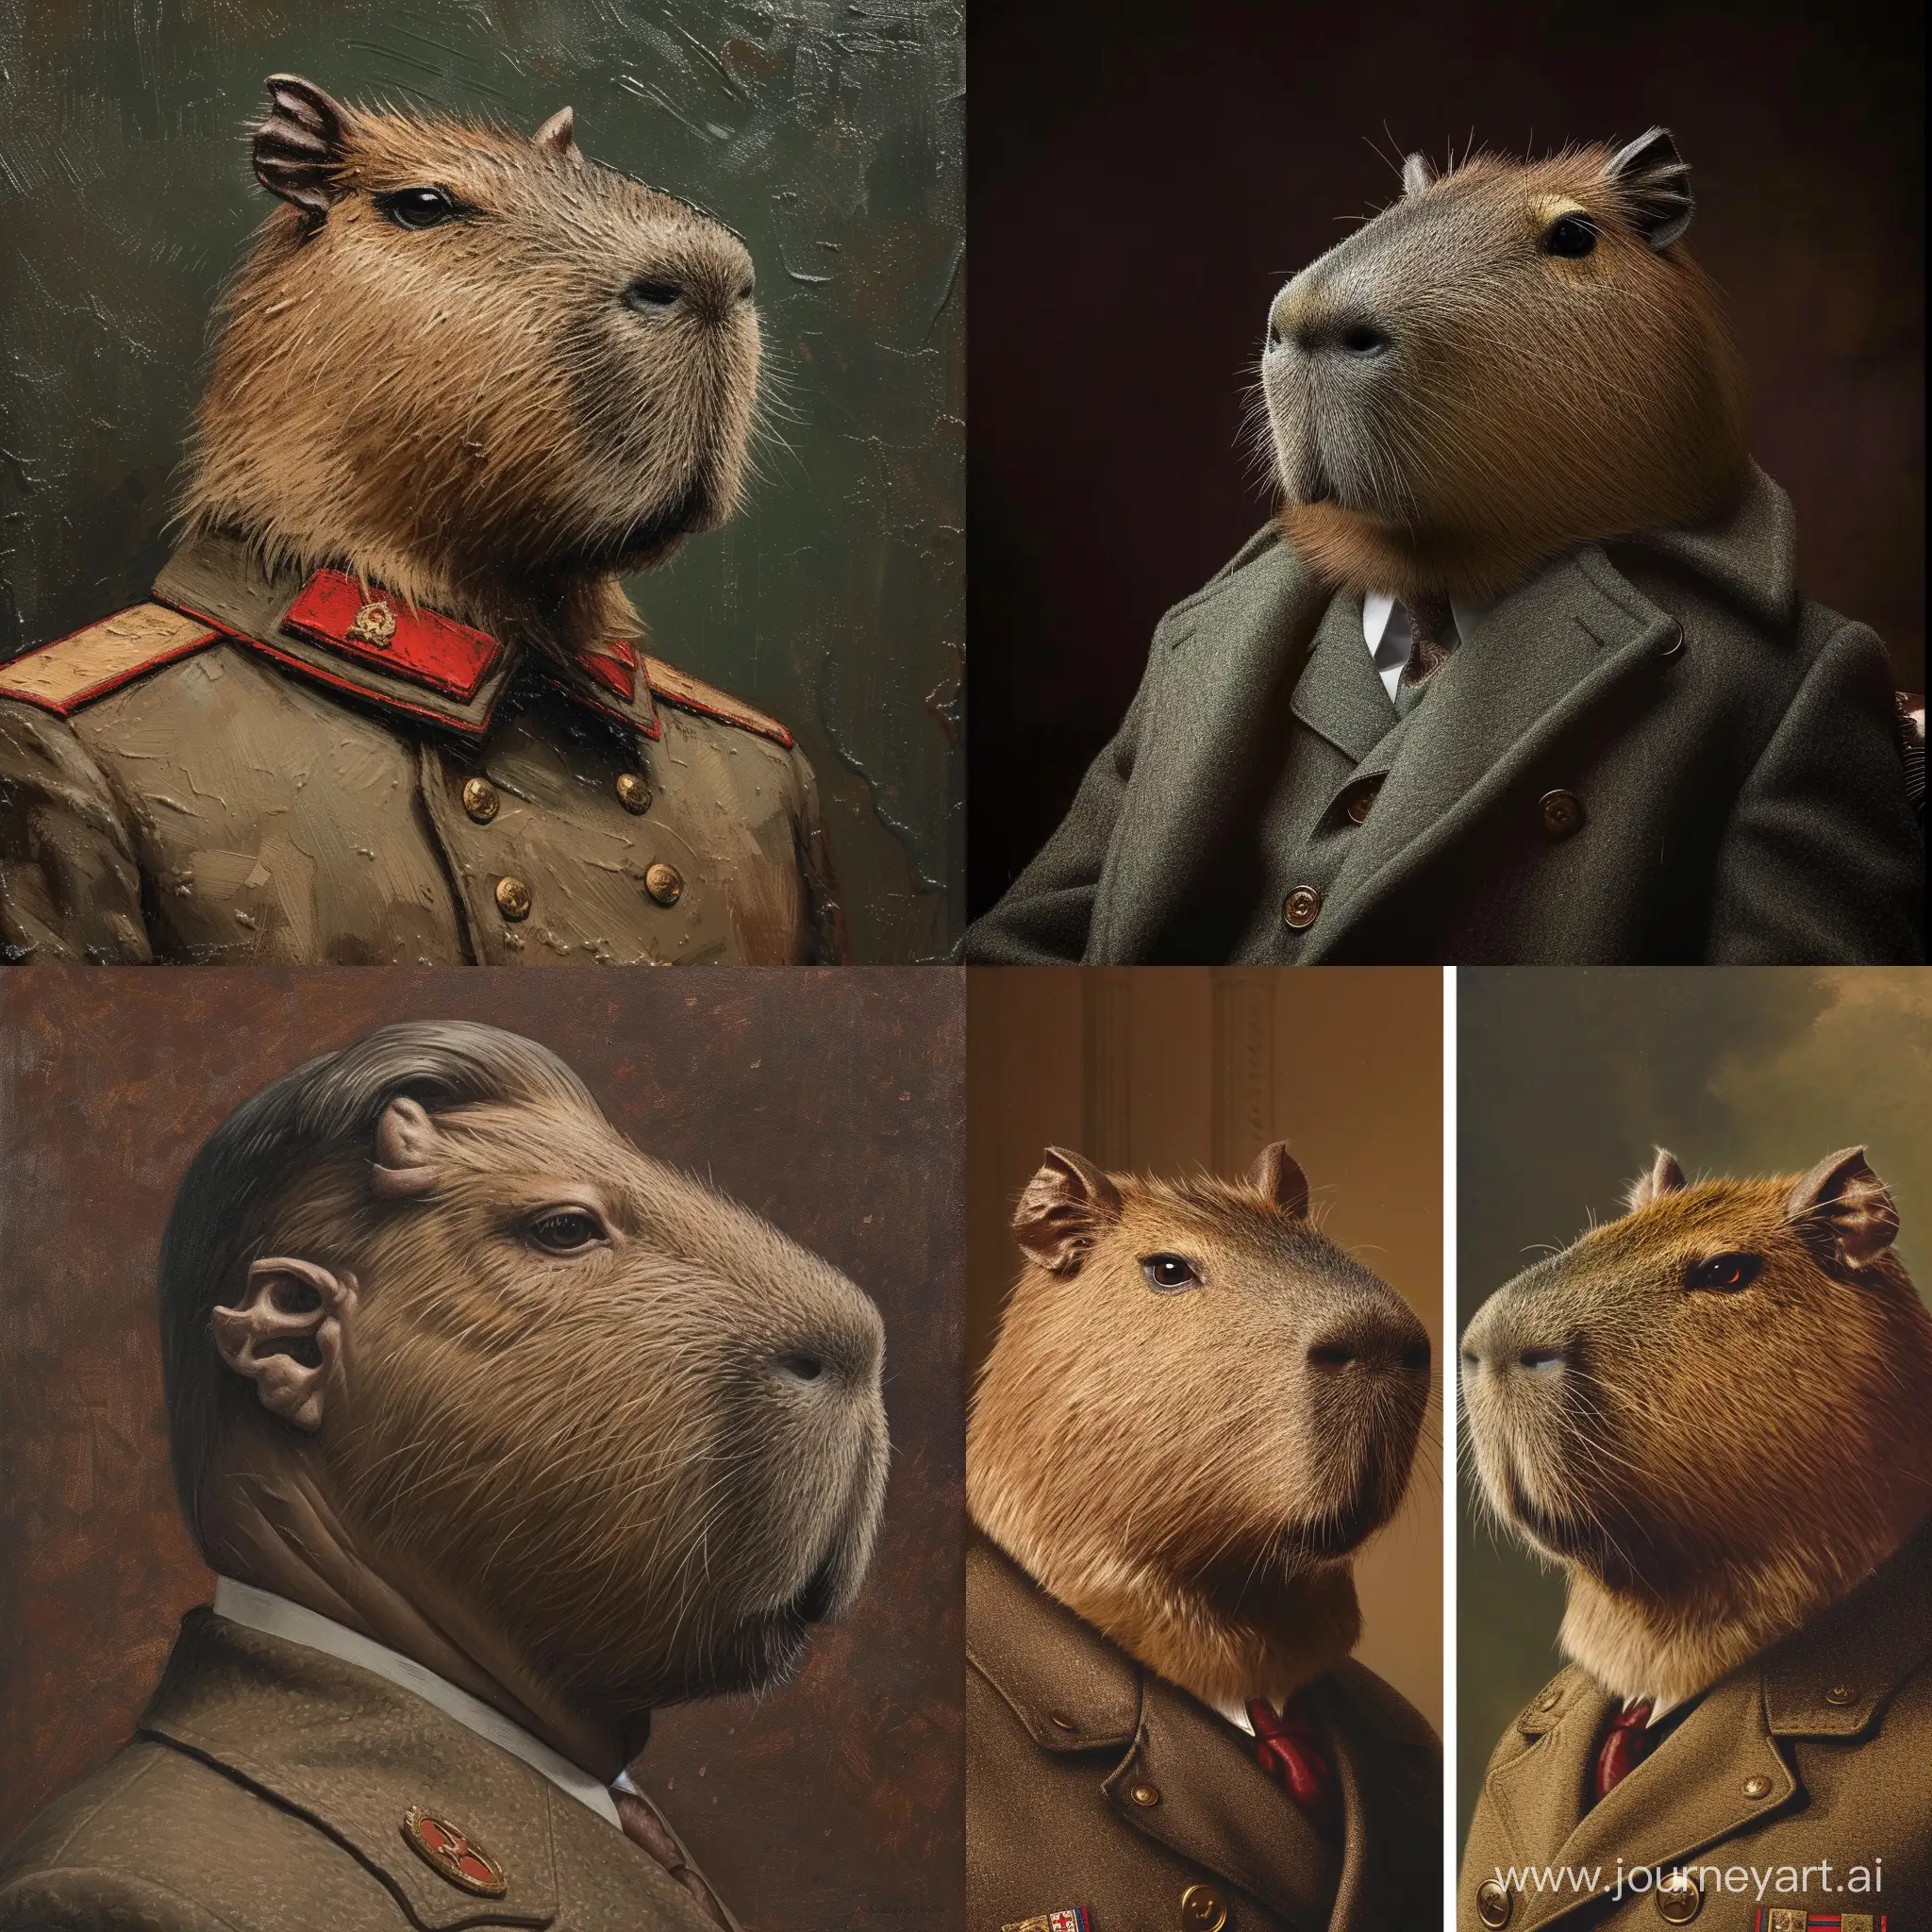 Realistic-Official-Portrait-of-Capybara-with-a-Resemblance-to-Joseph-Stalin